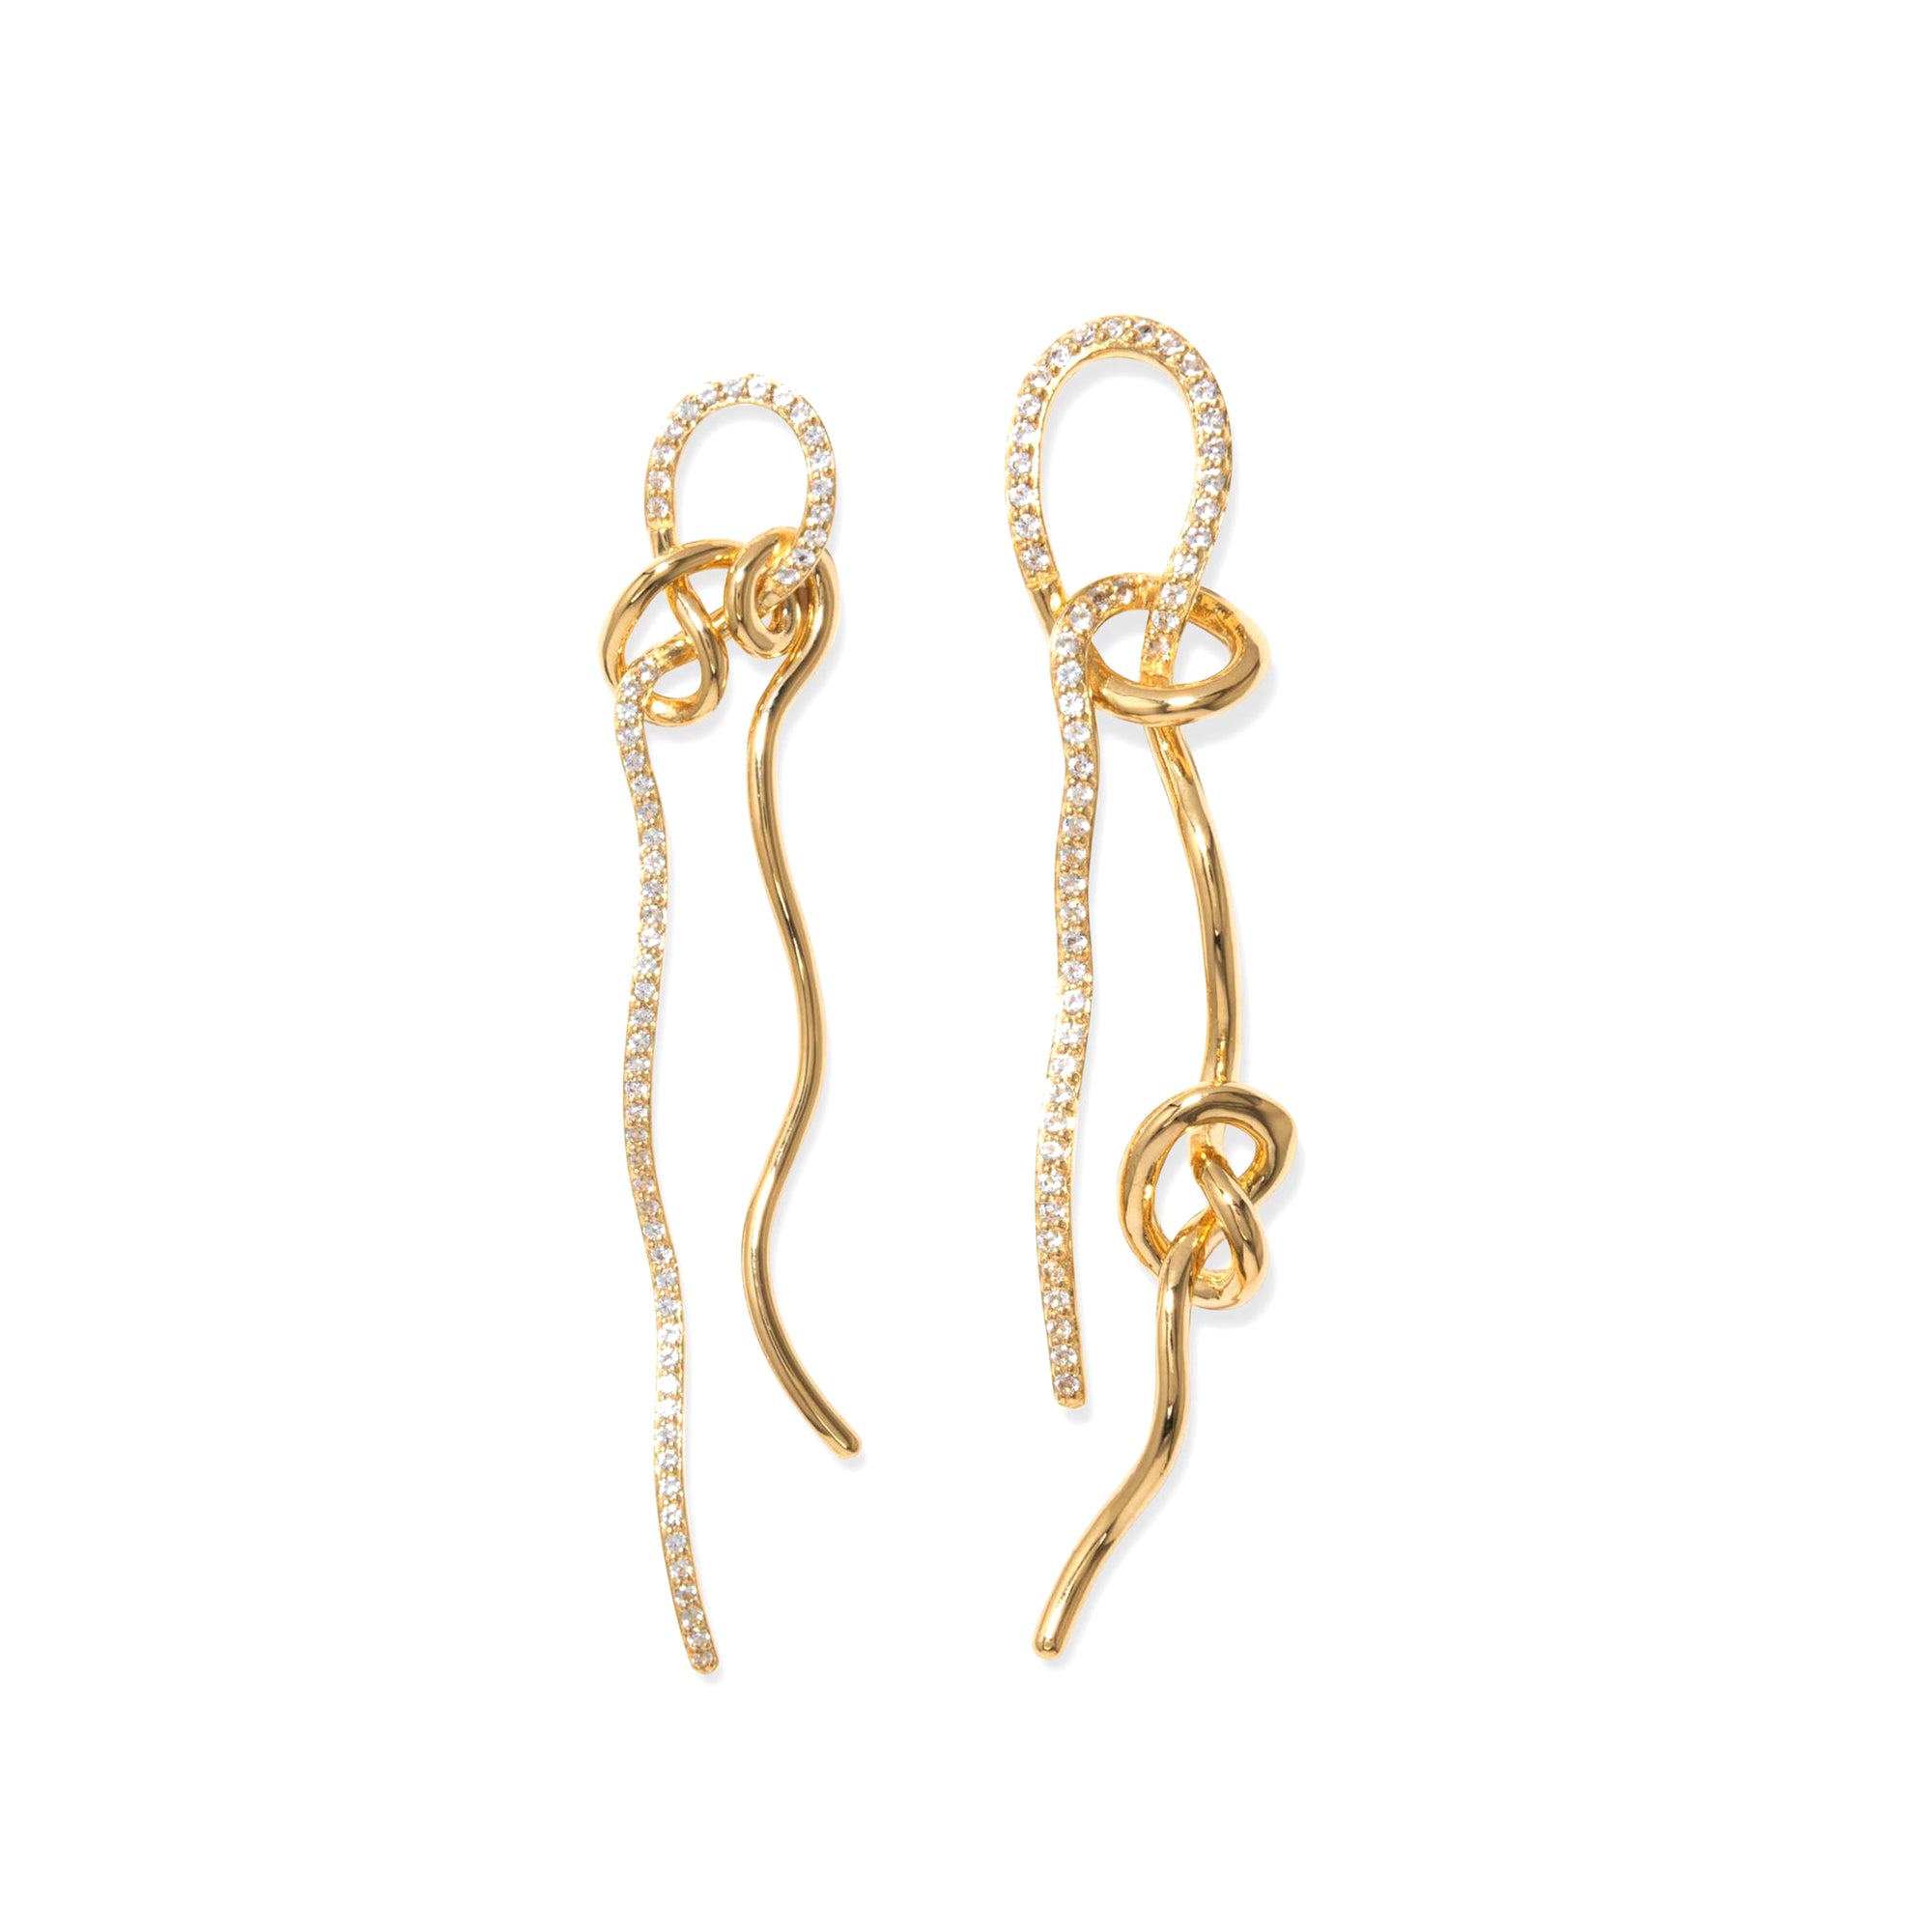 Completedworks - DSM Exclusive Knotted Long Earring - (Yellow Gold) view 1